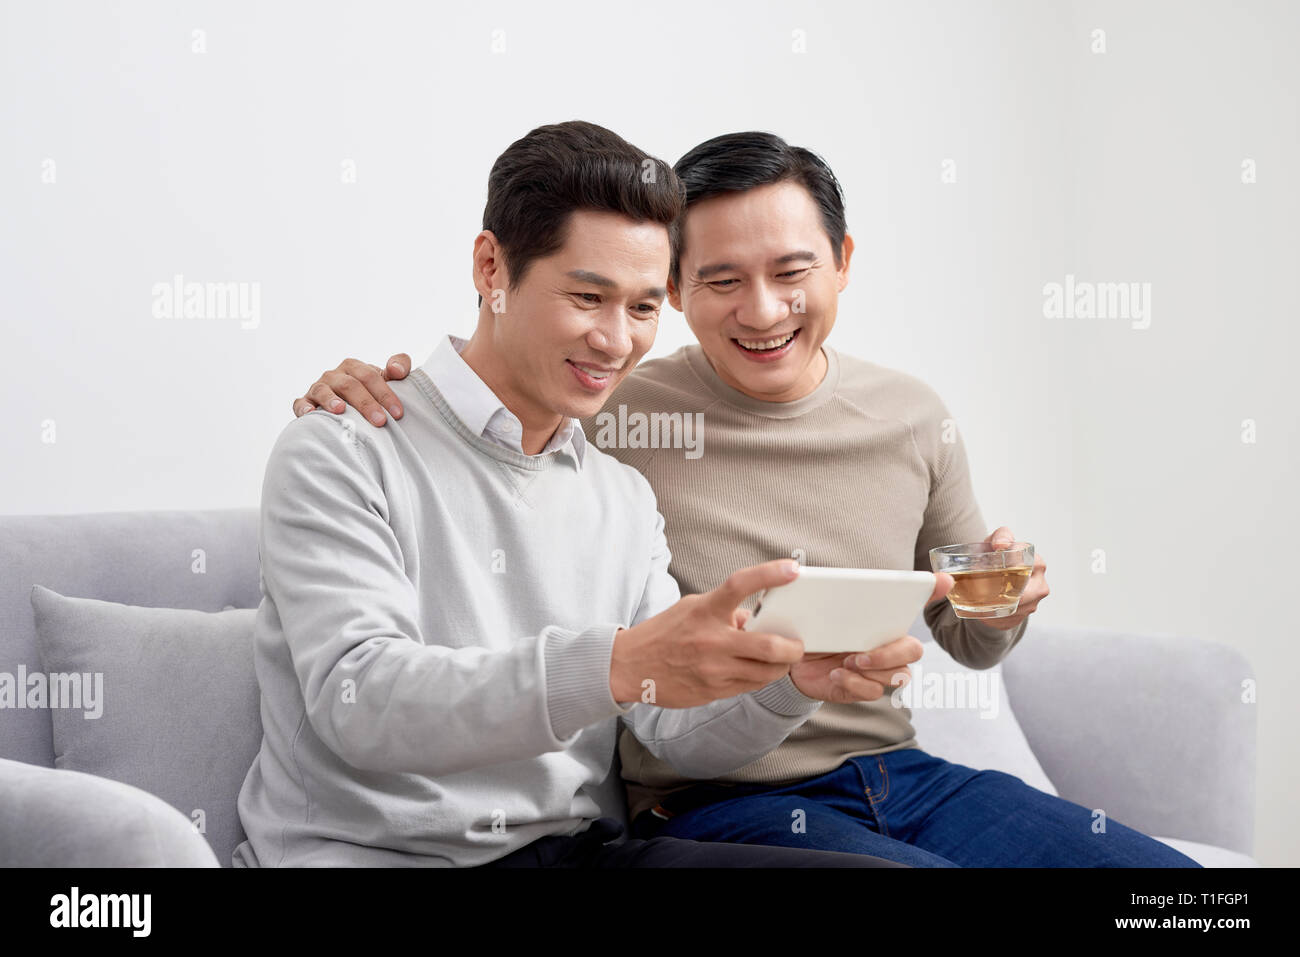 Cheerful young men dressed in casual wear smiling at camera while making selfie photo on front camera Stock Photo